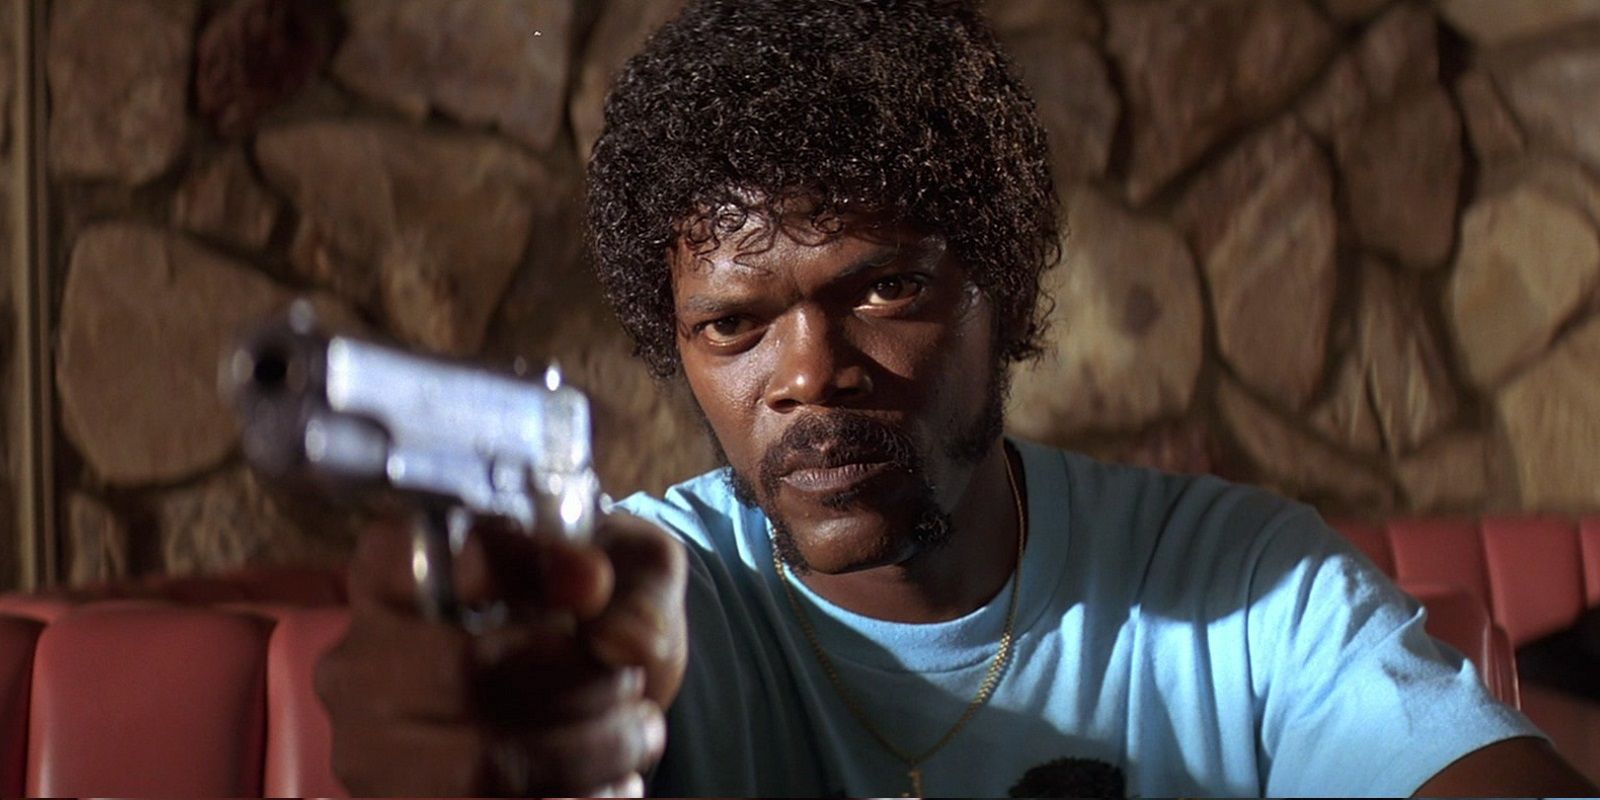 Samuel Jackson pointing a gun in the cafe in Pulp Fiction 